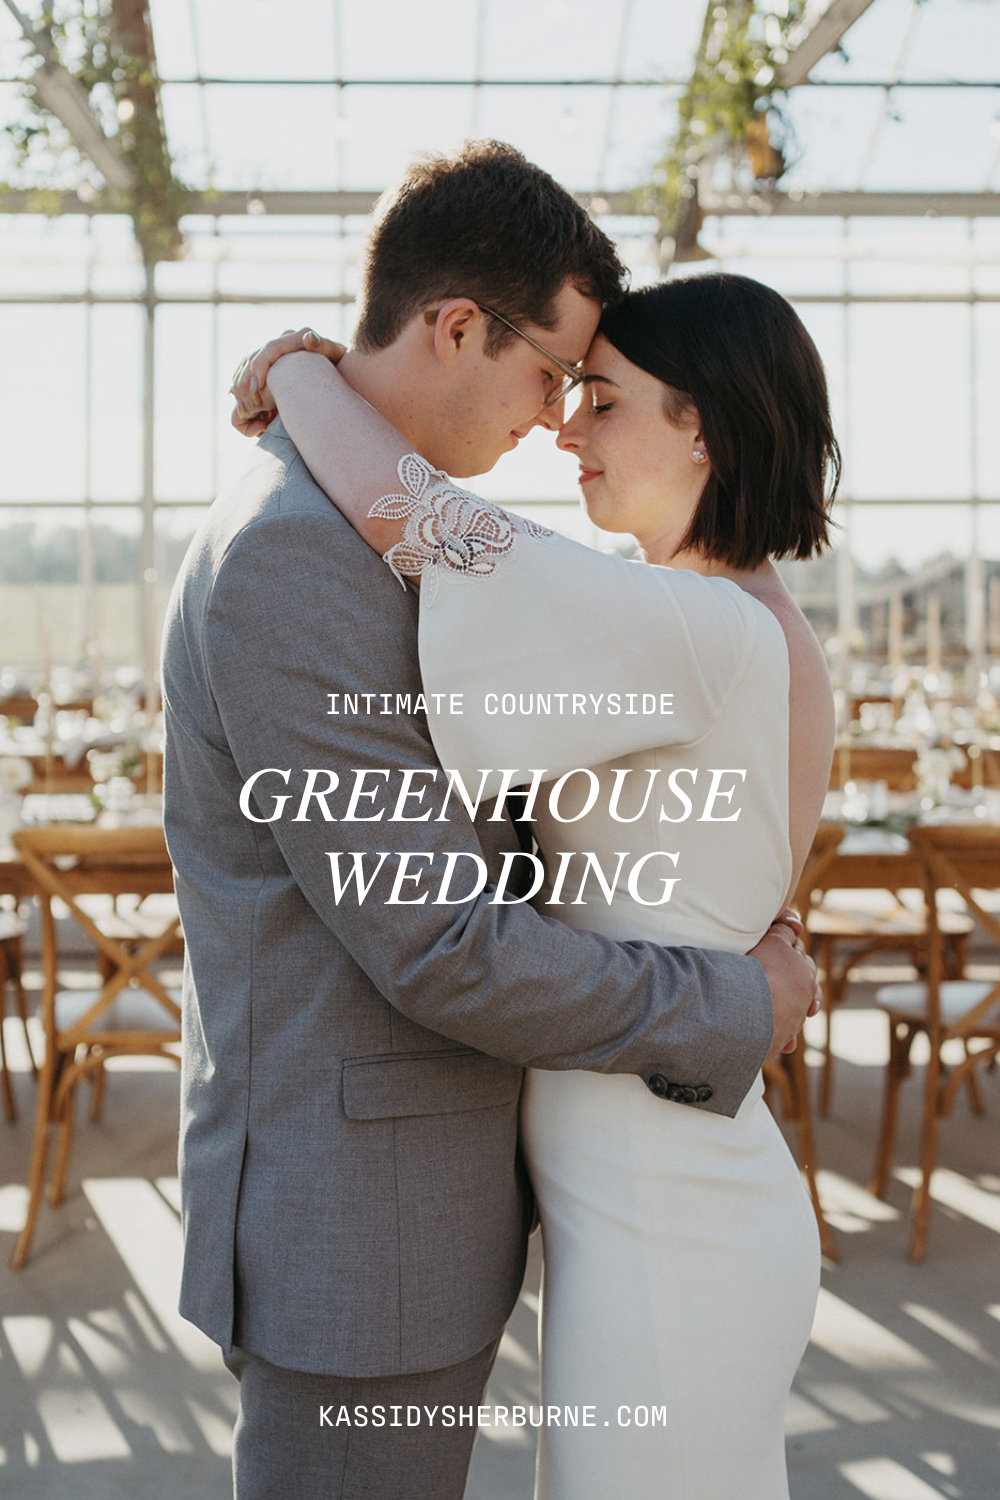 intimate-countryside-greenhouse-wedding-venue1.png